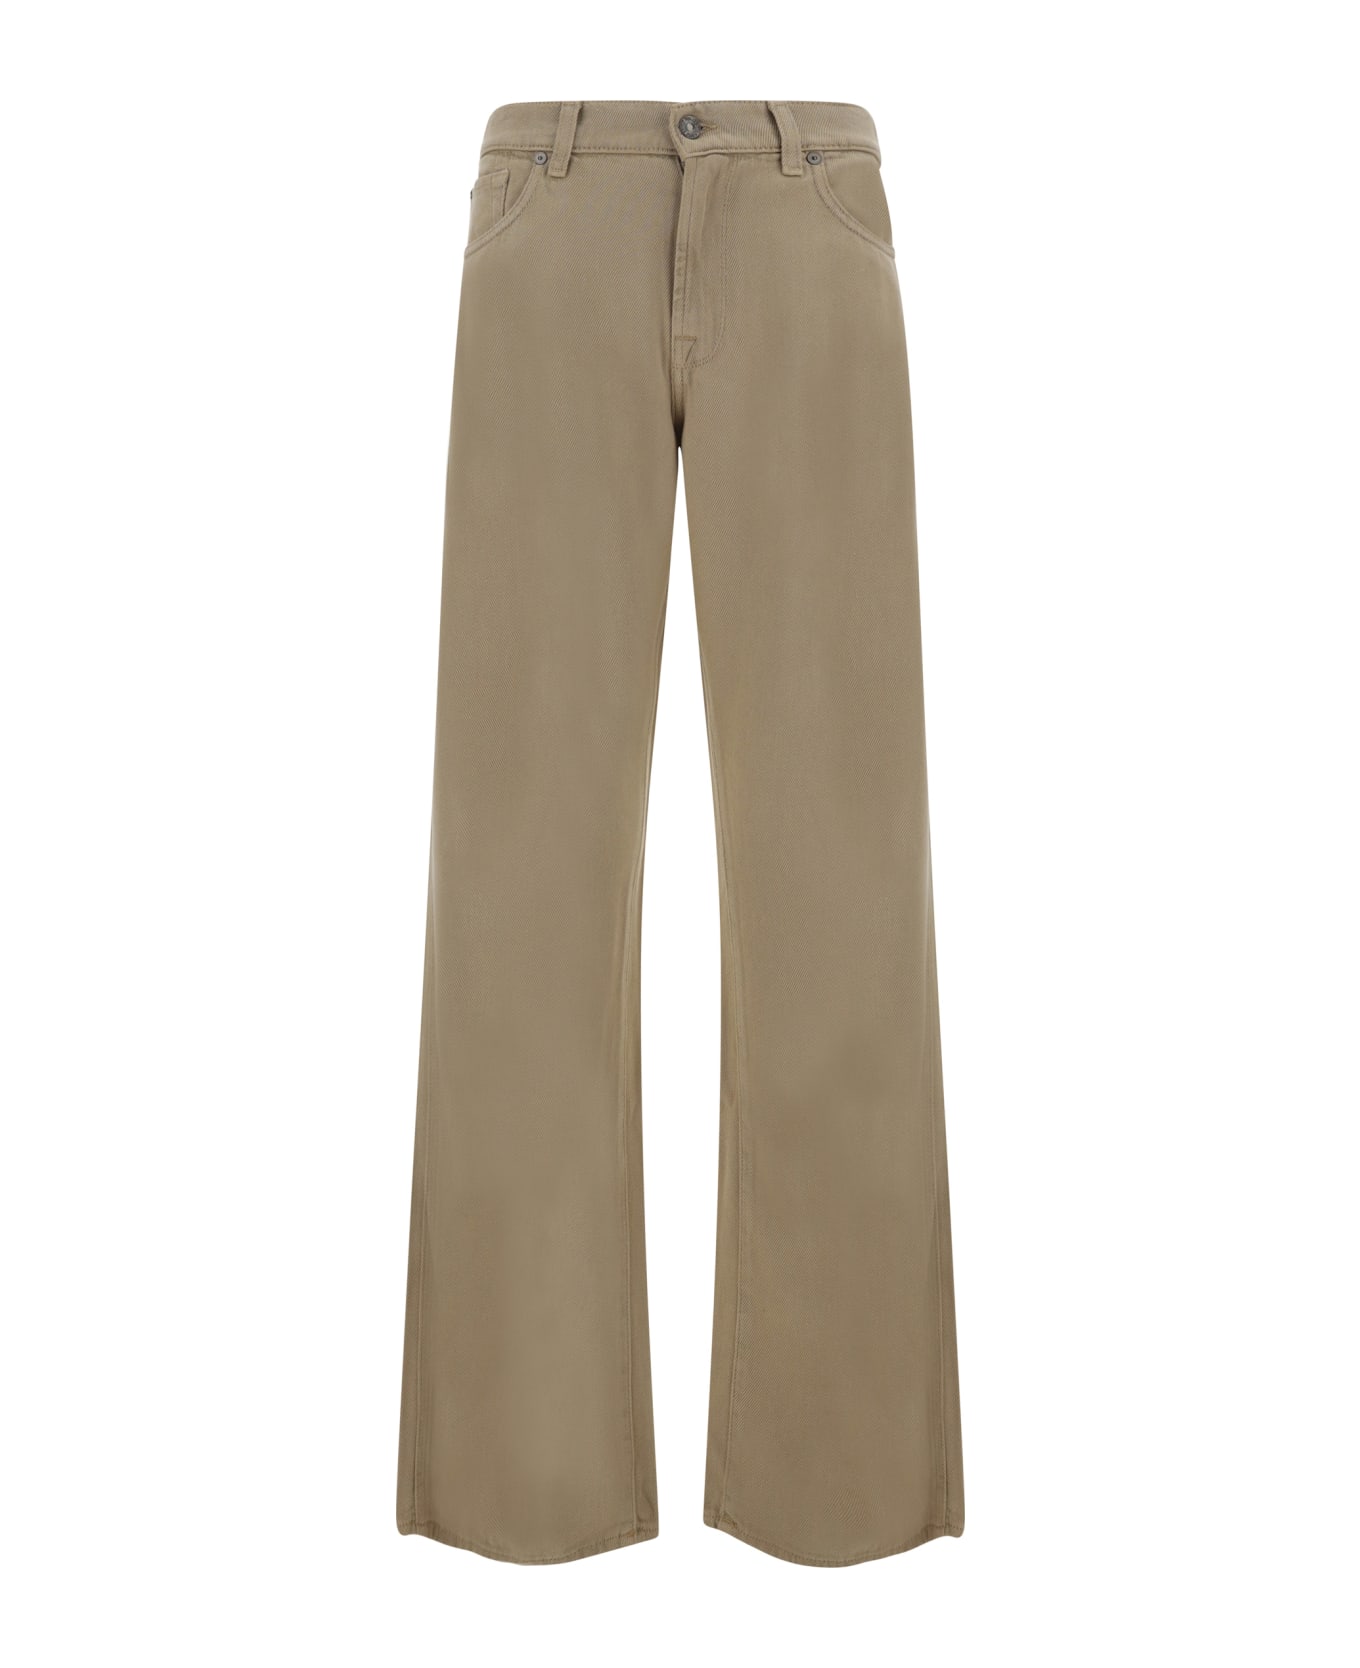 7 For All Mankind Tencel Pants - Beige ボトムス